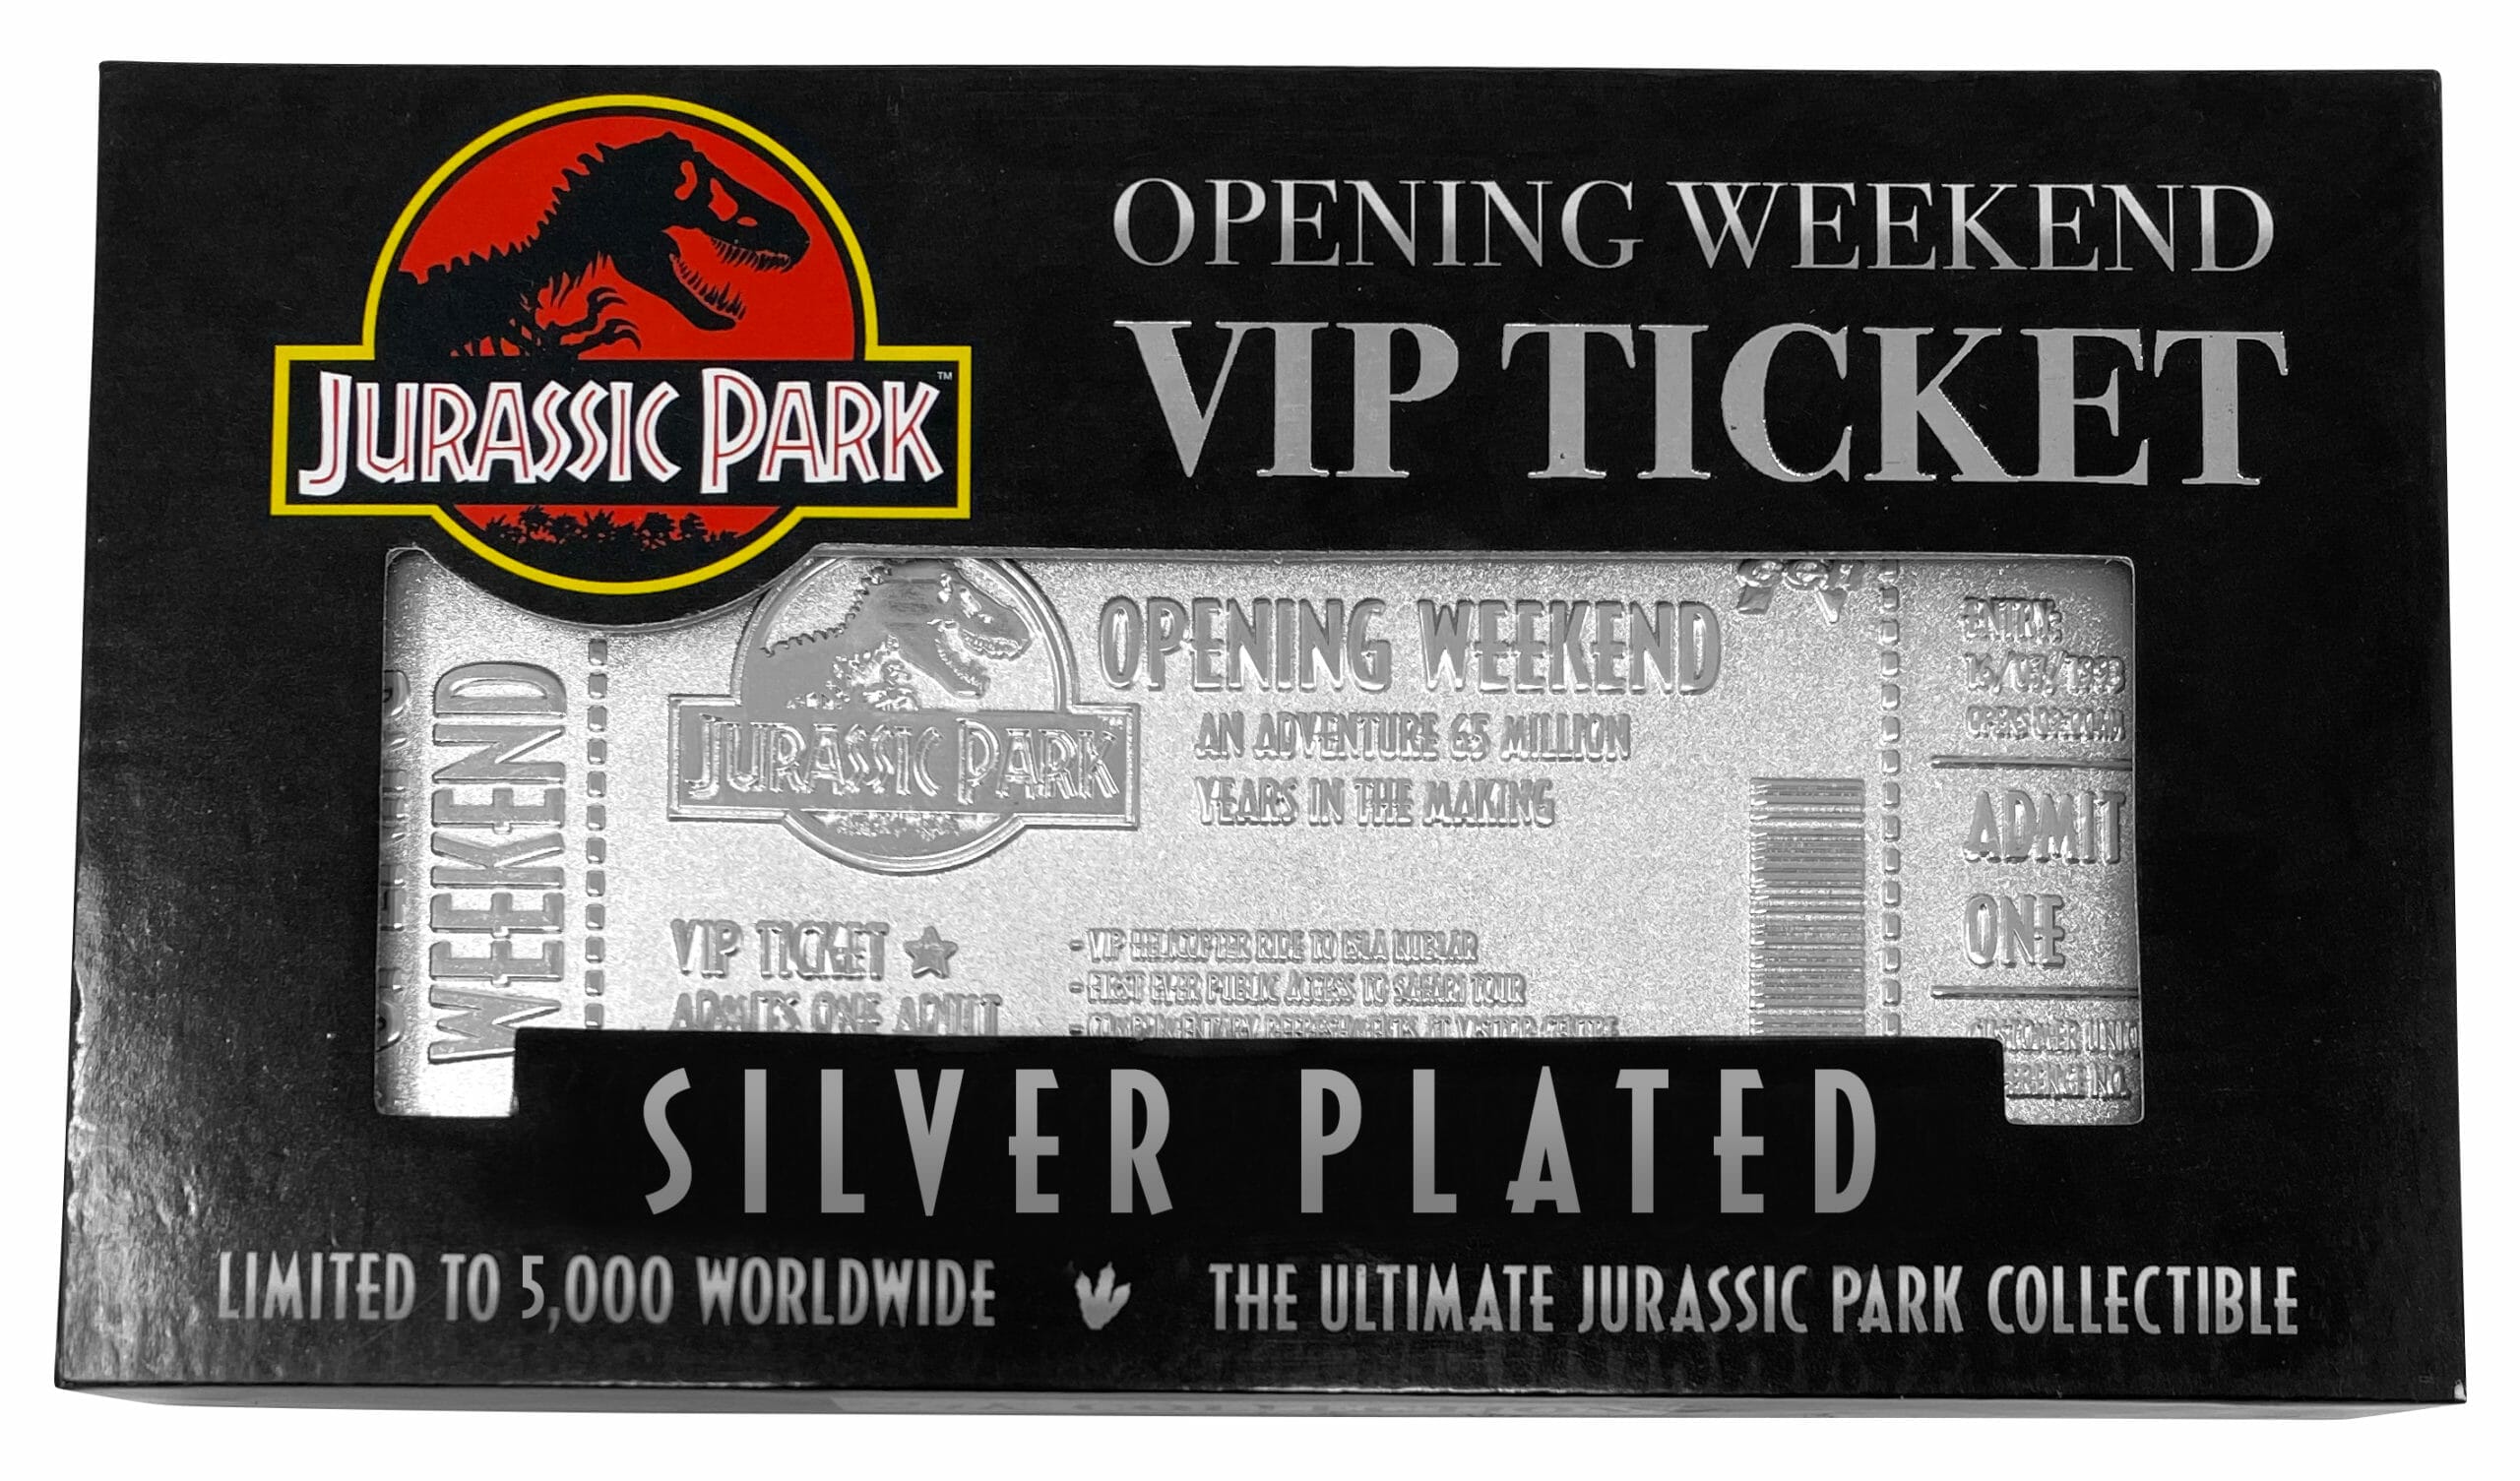 Jurassic Park Silver Plated Ticket